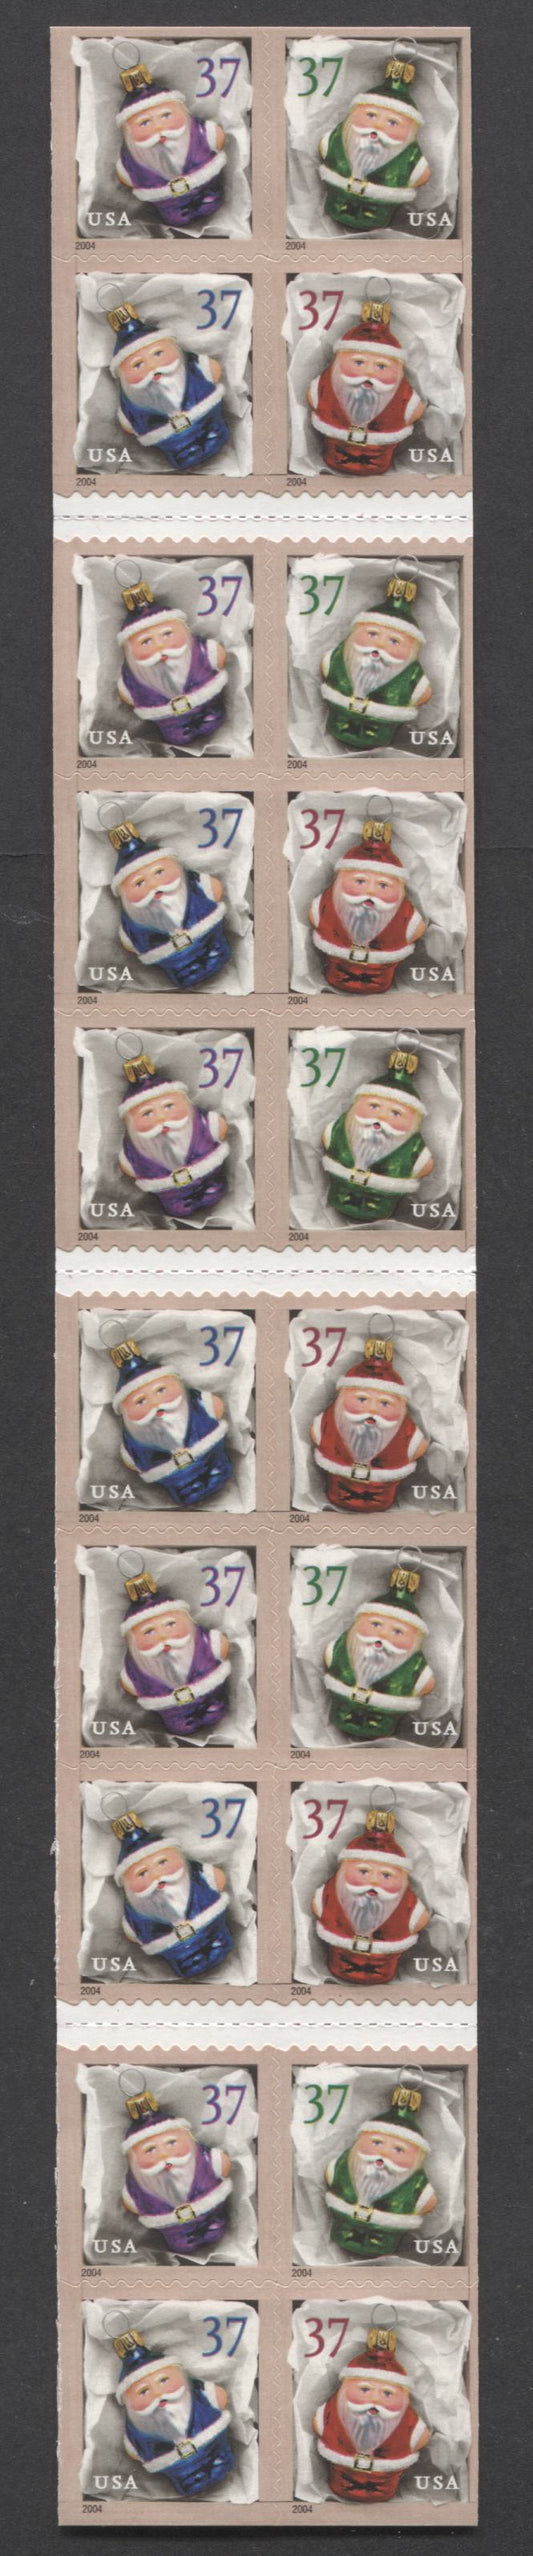 Lot 199 United States SC#3890b-d 37c Multicolored 2004 Christmas Issue, A VFNH Booklet Of 20, Click on Listing to See ALL Pictures, 2017 Scott Cat. $15